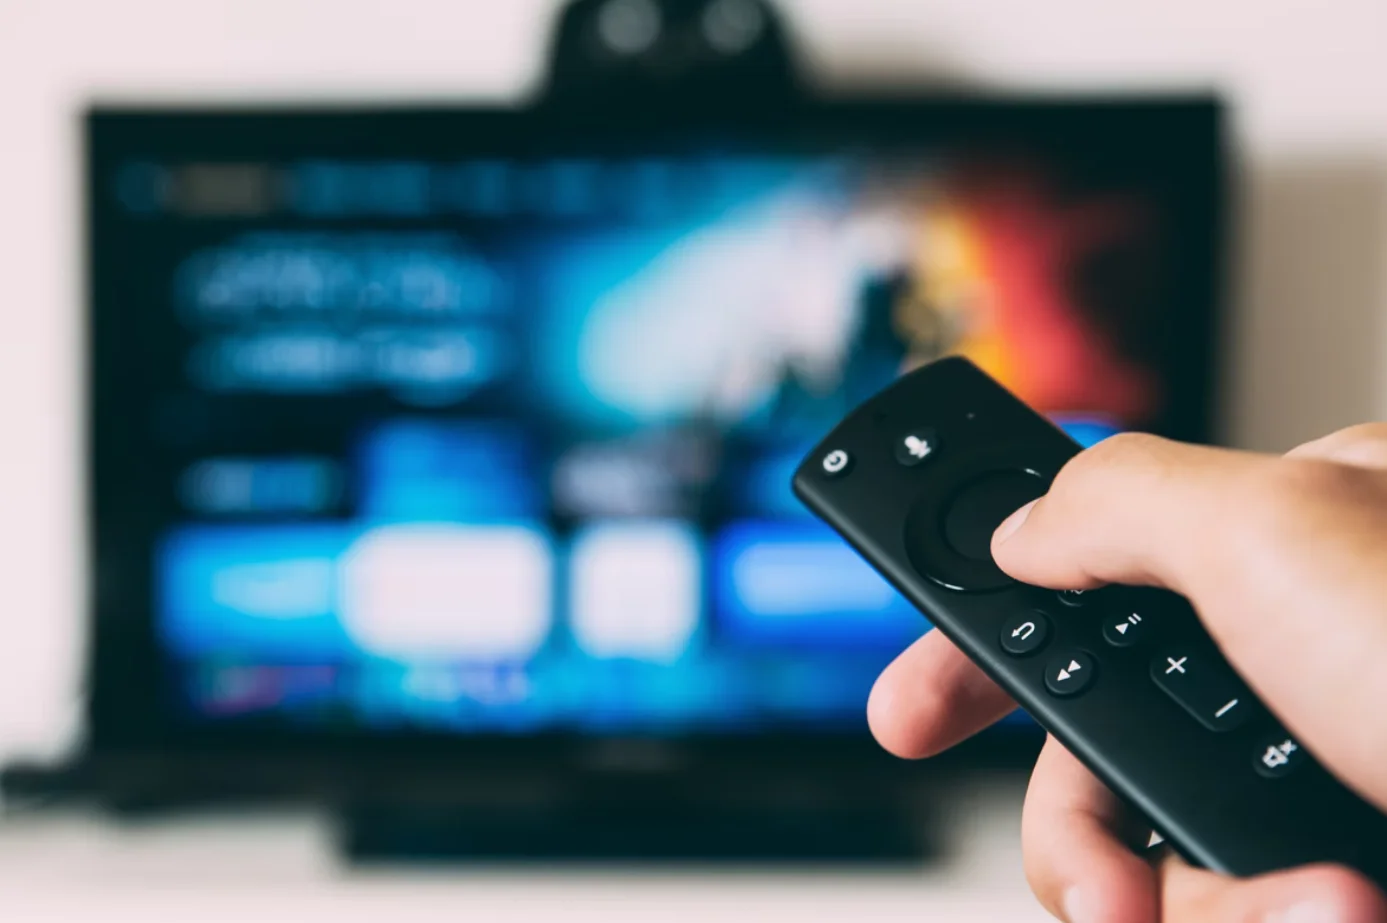 How to get HBO Max on Fire TV or Fire device